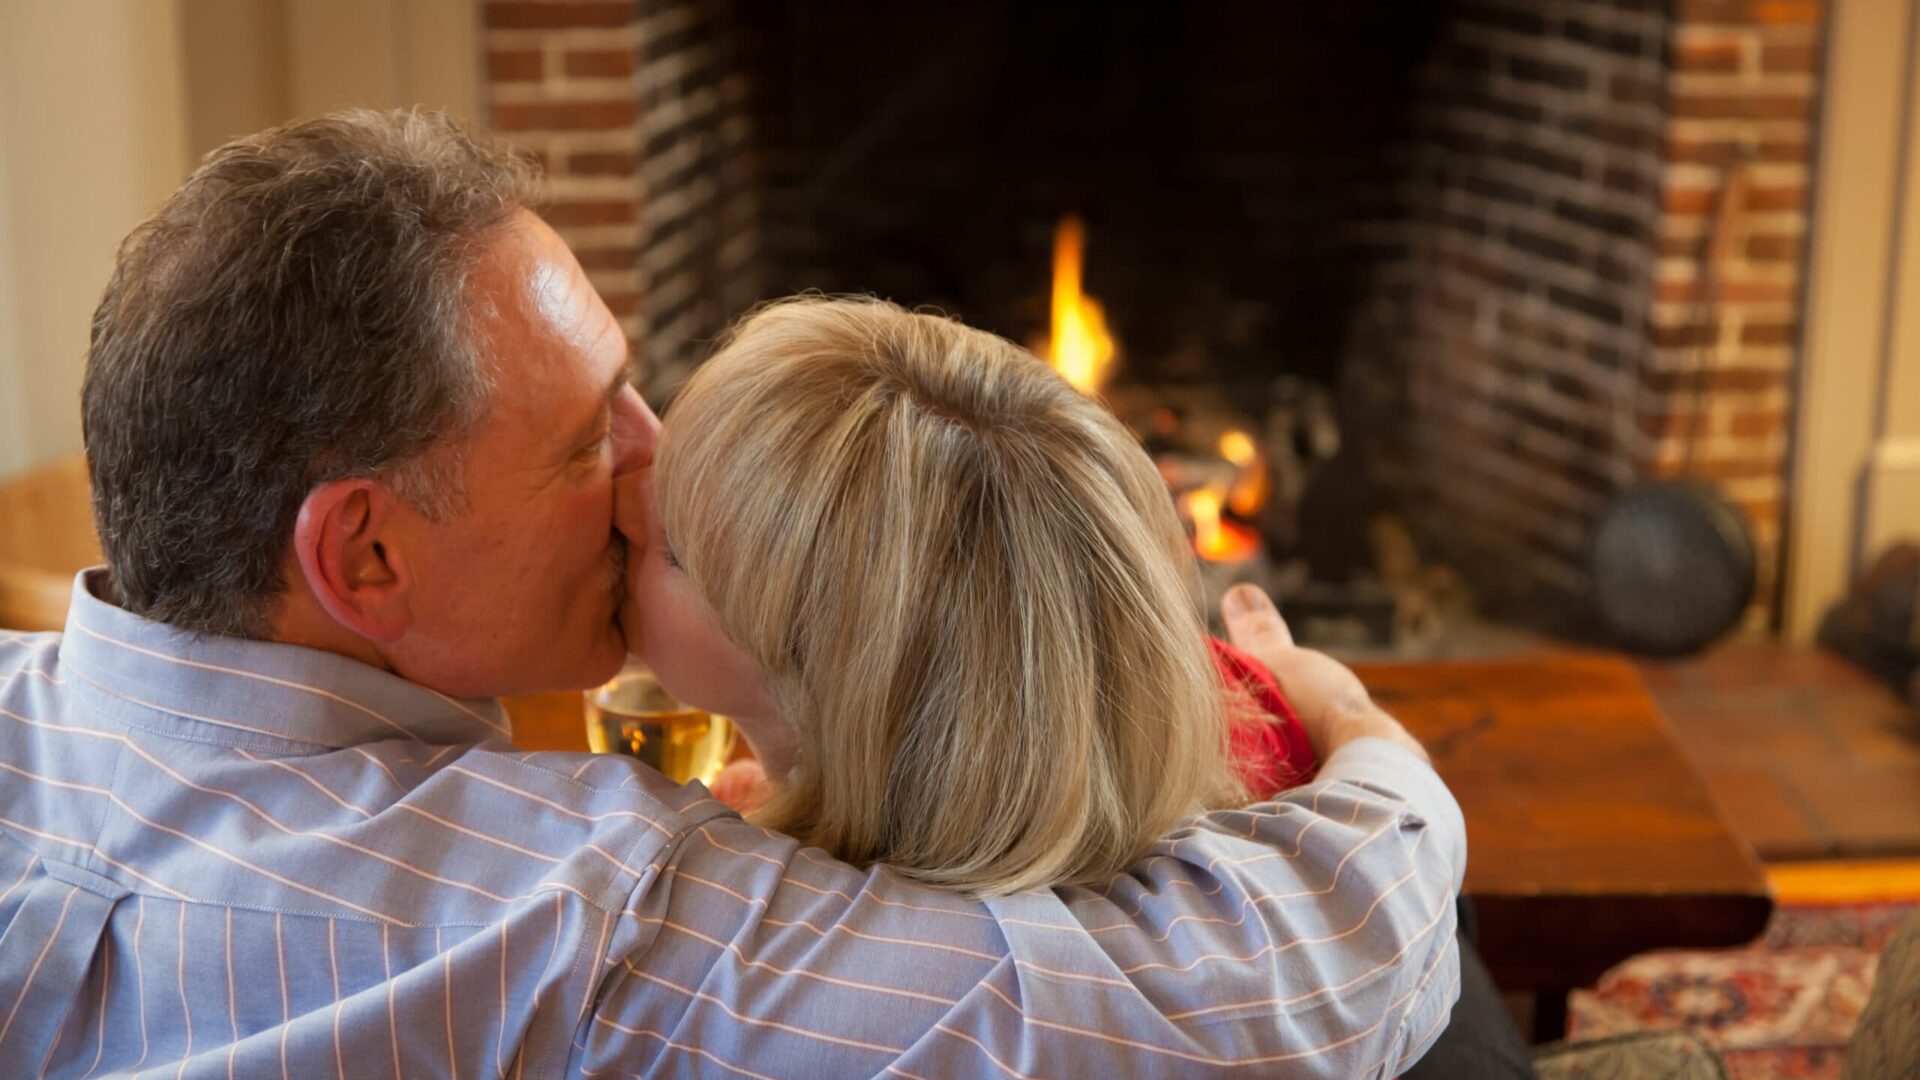 couple kissing in front of a fireplace|Cyber Monday sale image